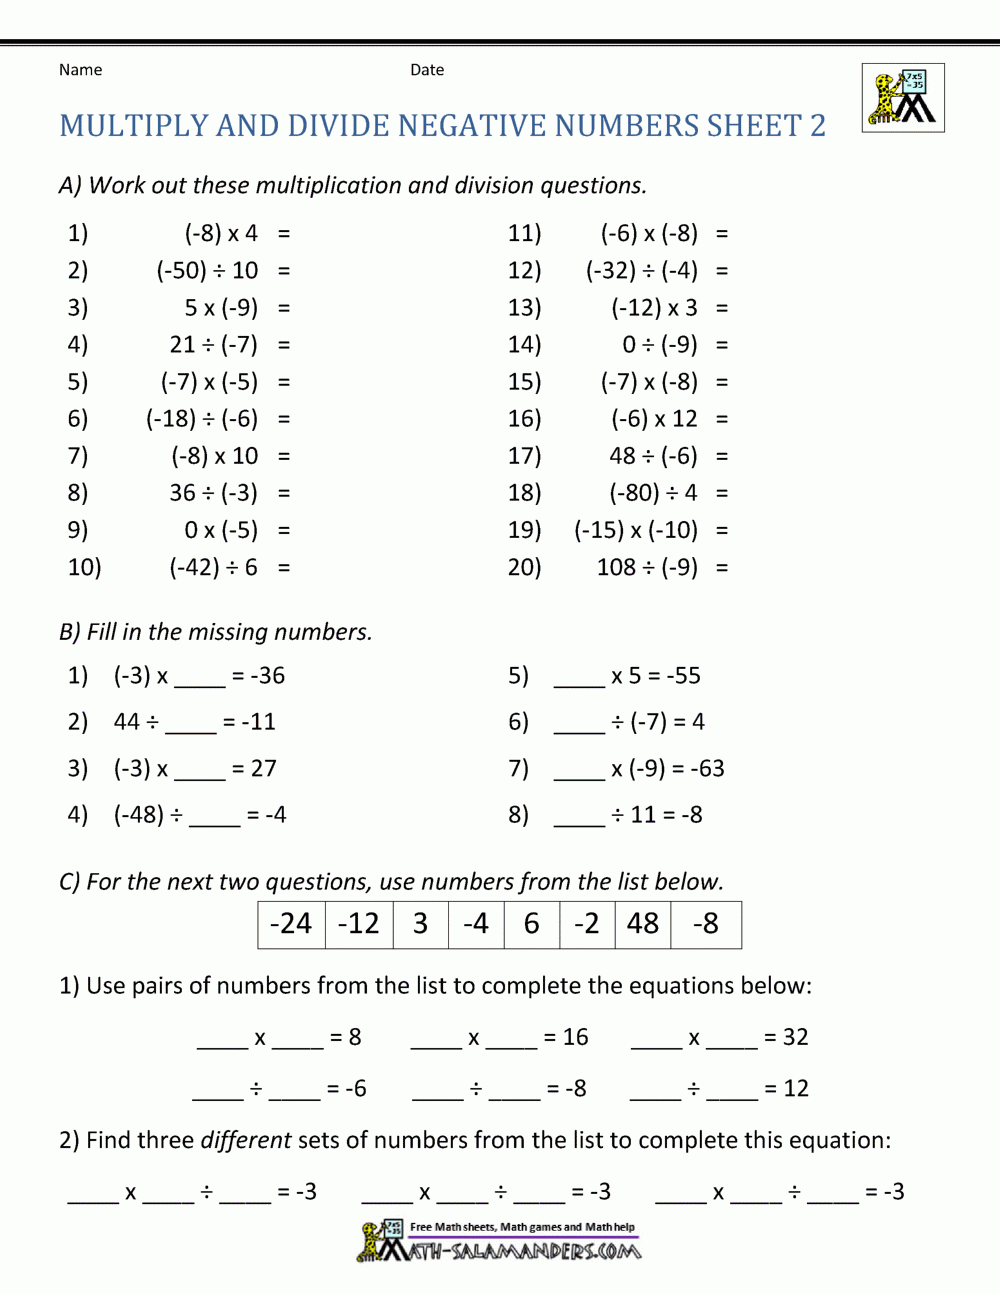 Multiply And Divide Negative Numbers